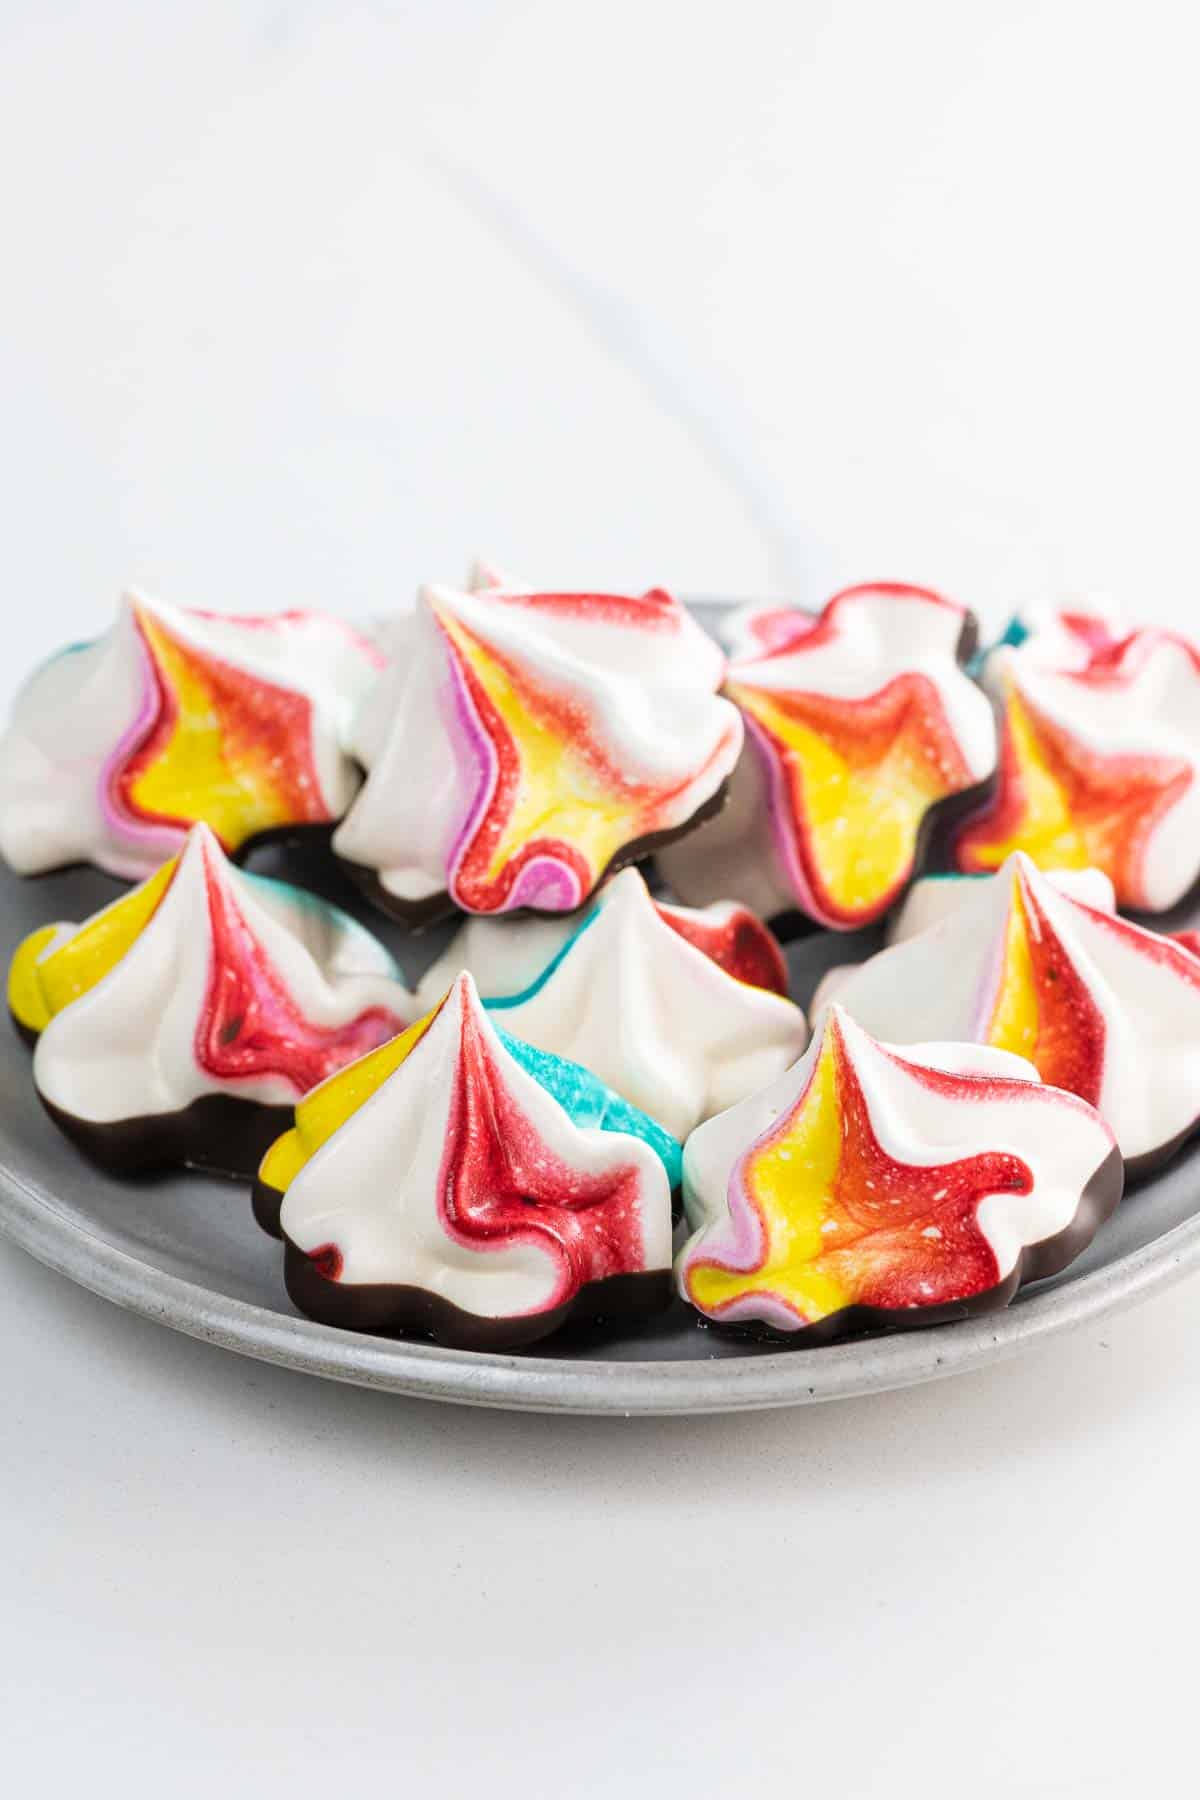 rainbow-colored chocolate meringue cookies on a plate